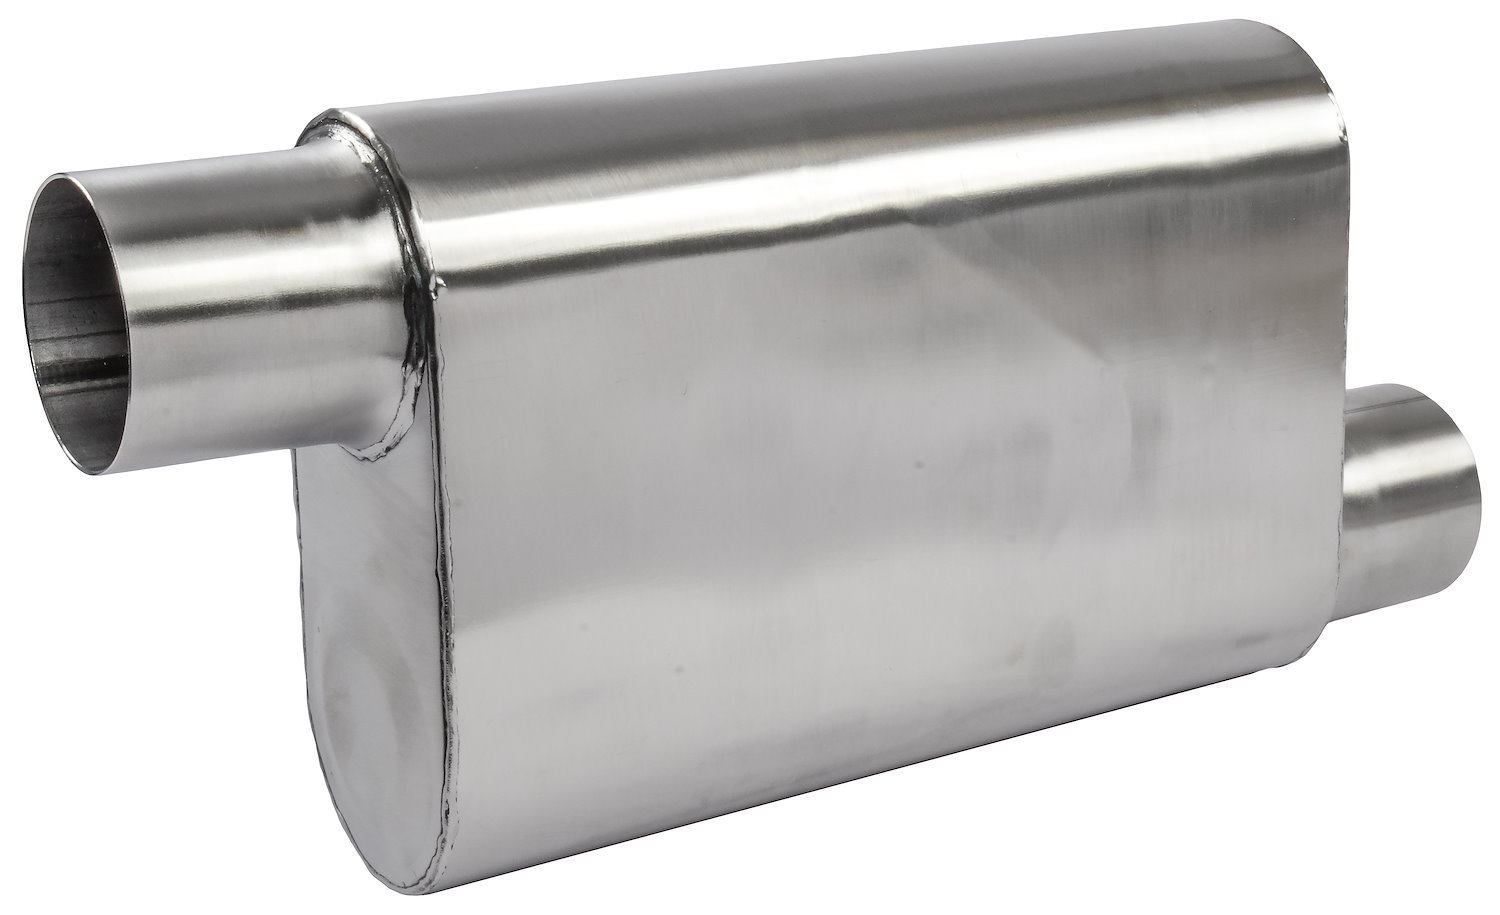 Stainless Steel Chambered Deep Tone Muffler with 3" Offset Inlet & Outlet